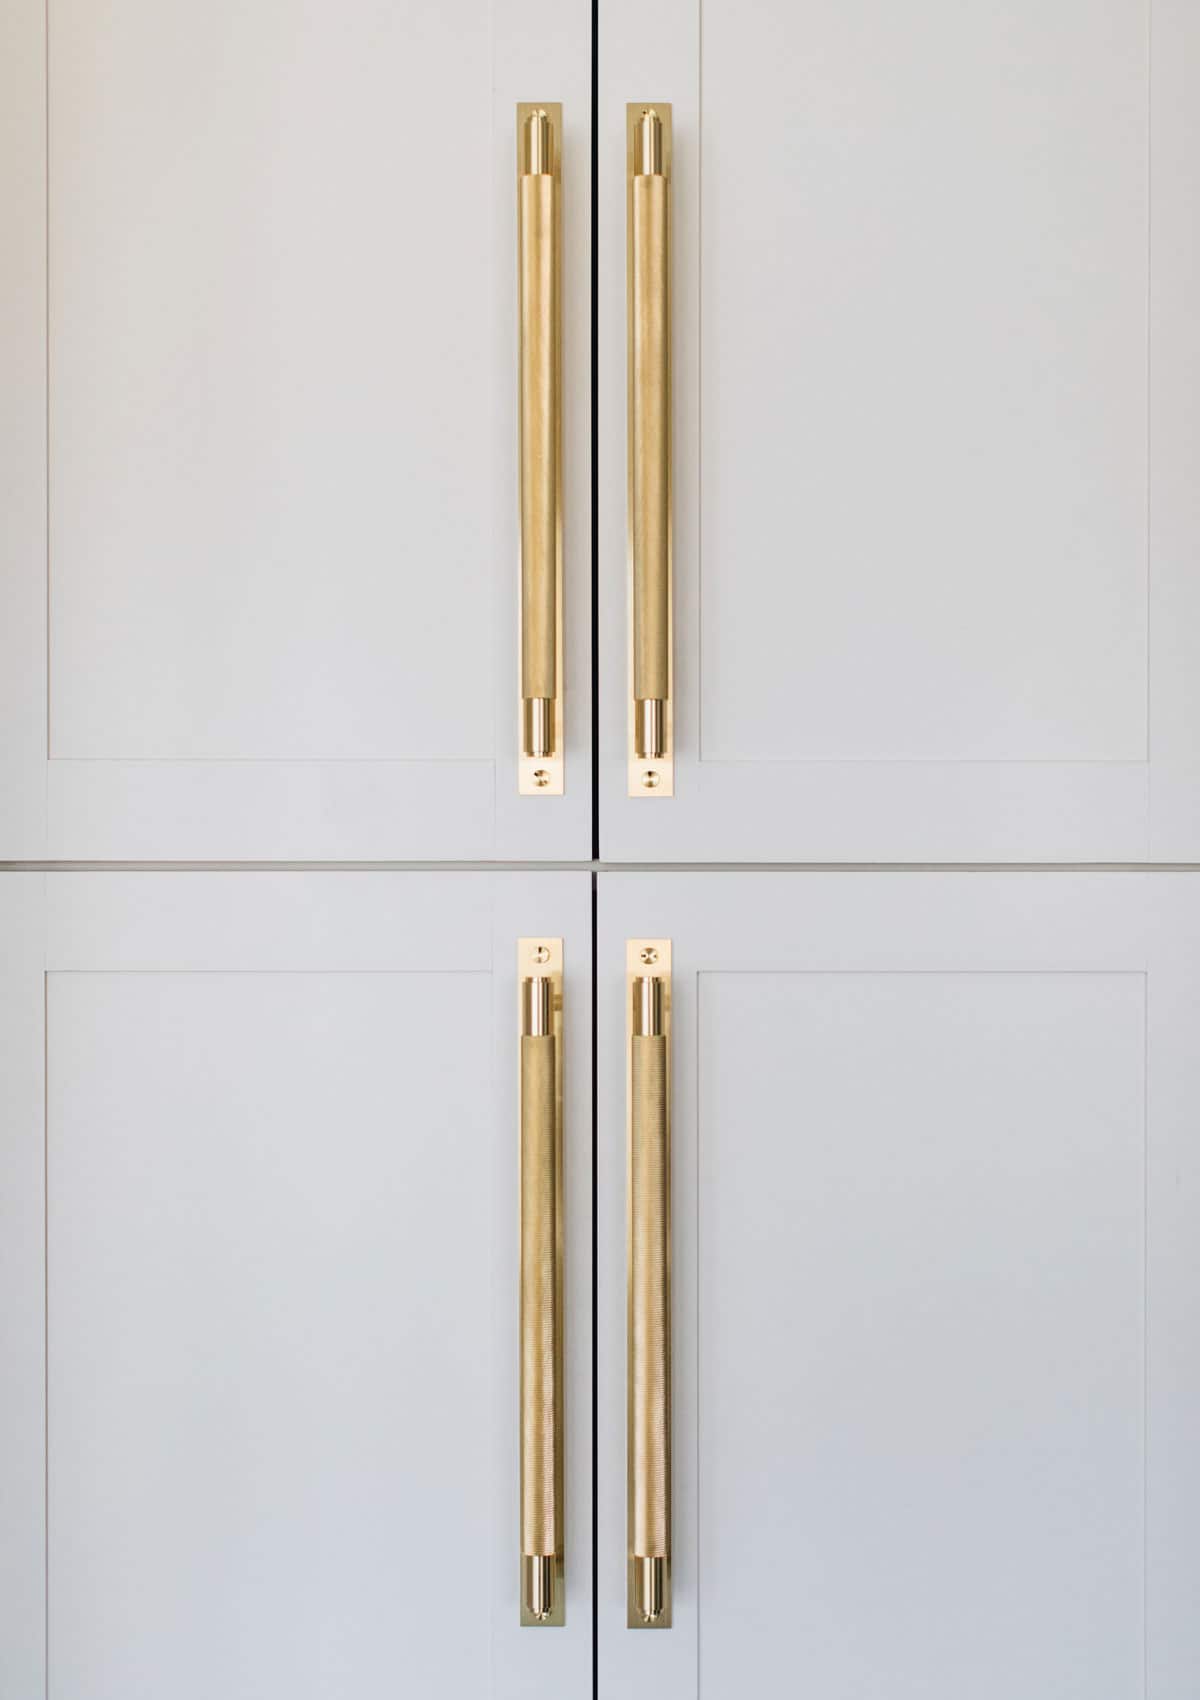 White Kitchens Are Not Out Here are 7 Ideas to Warm Them Up - Luxe brass hardware warms these white kitchen cabinets